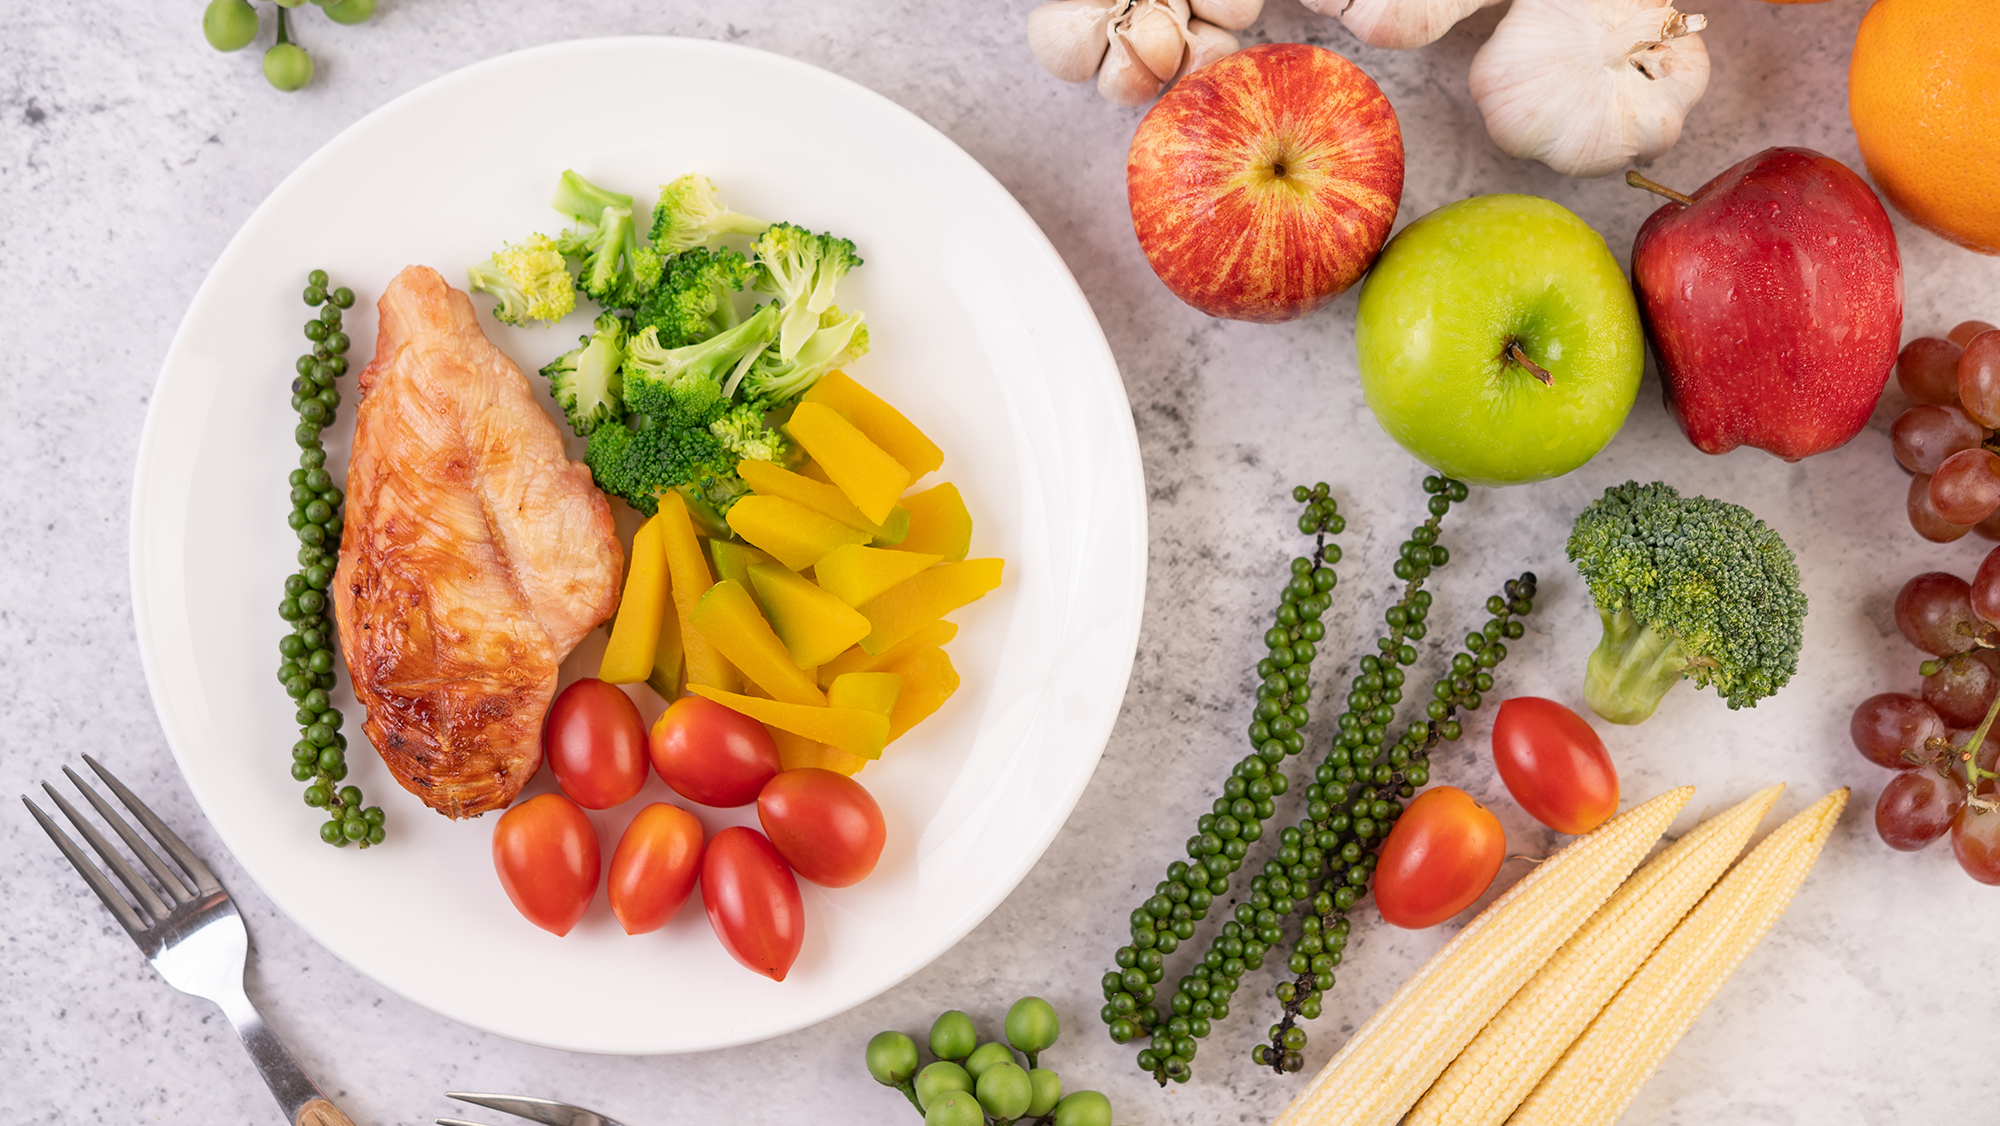 Understanding the Nutrition Plate Template: How Does It Work?